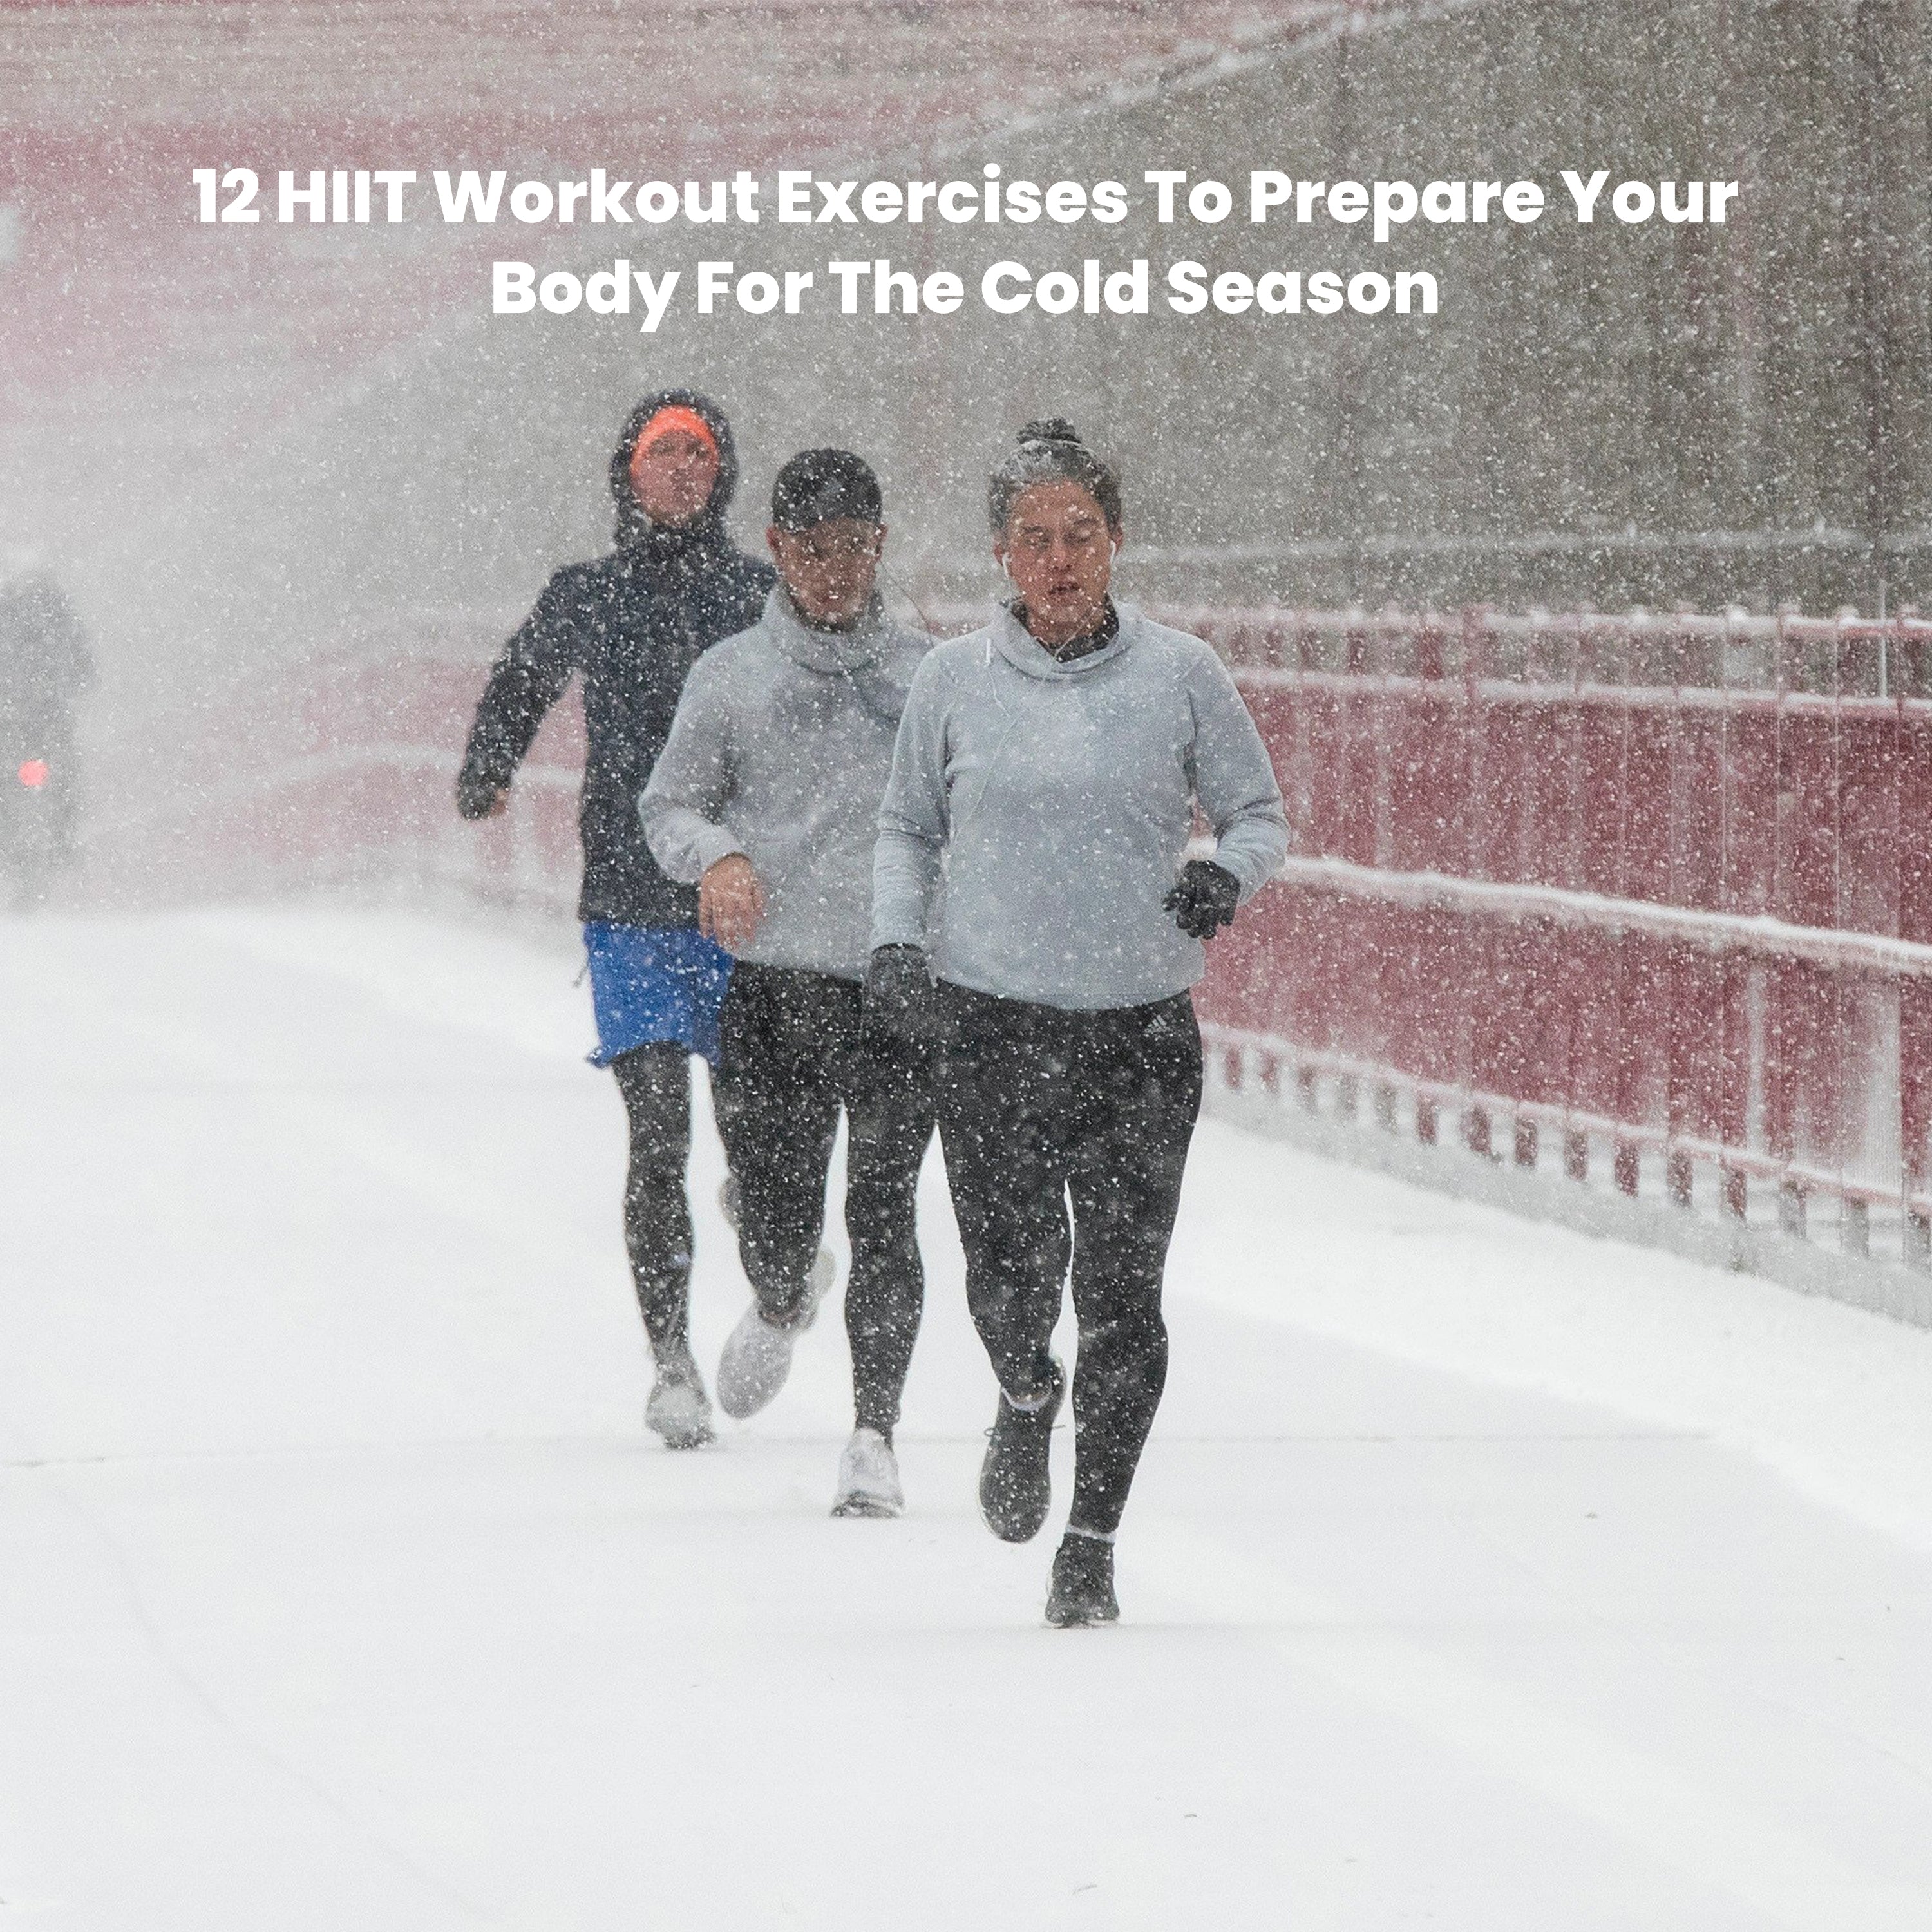 12 HIIT Workout Exercises To Prepare Your Body For The Cold Season